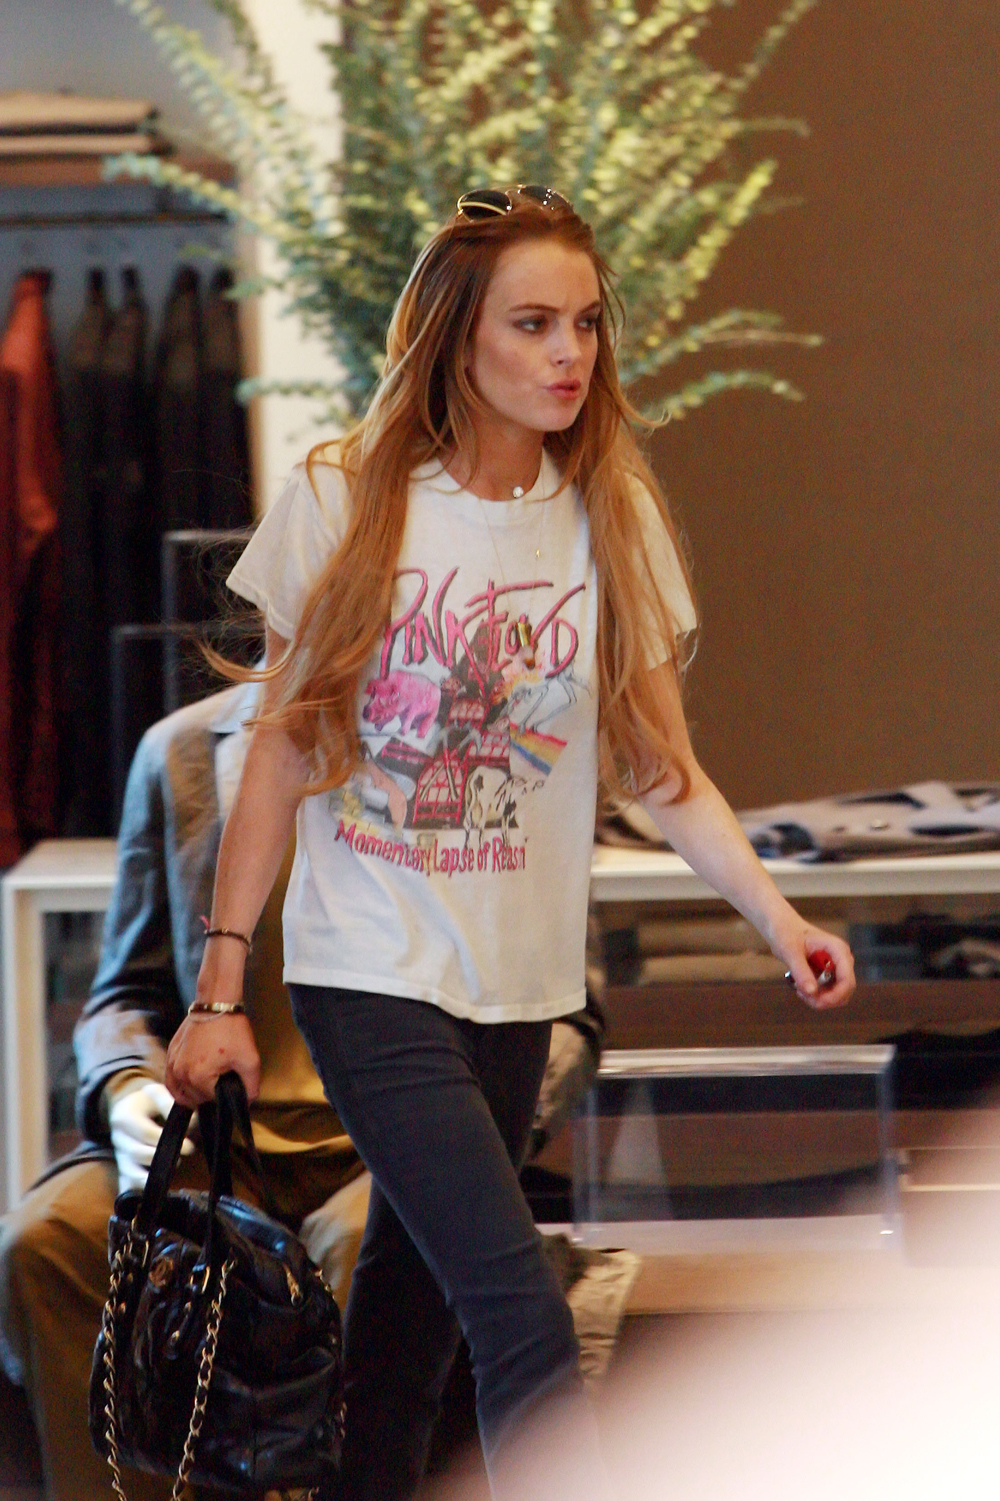 Lindsay Lohan goes shopping and denies breaking up with Samantha